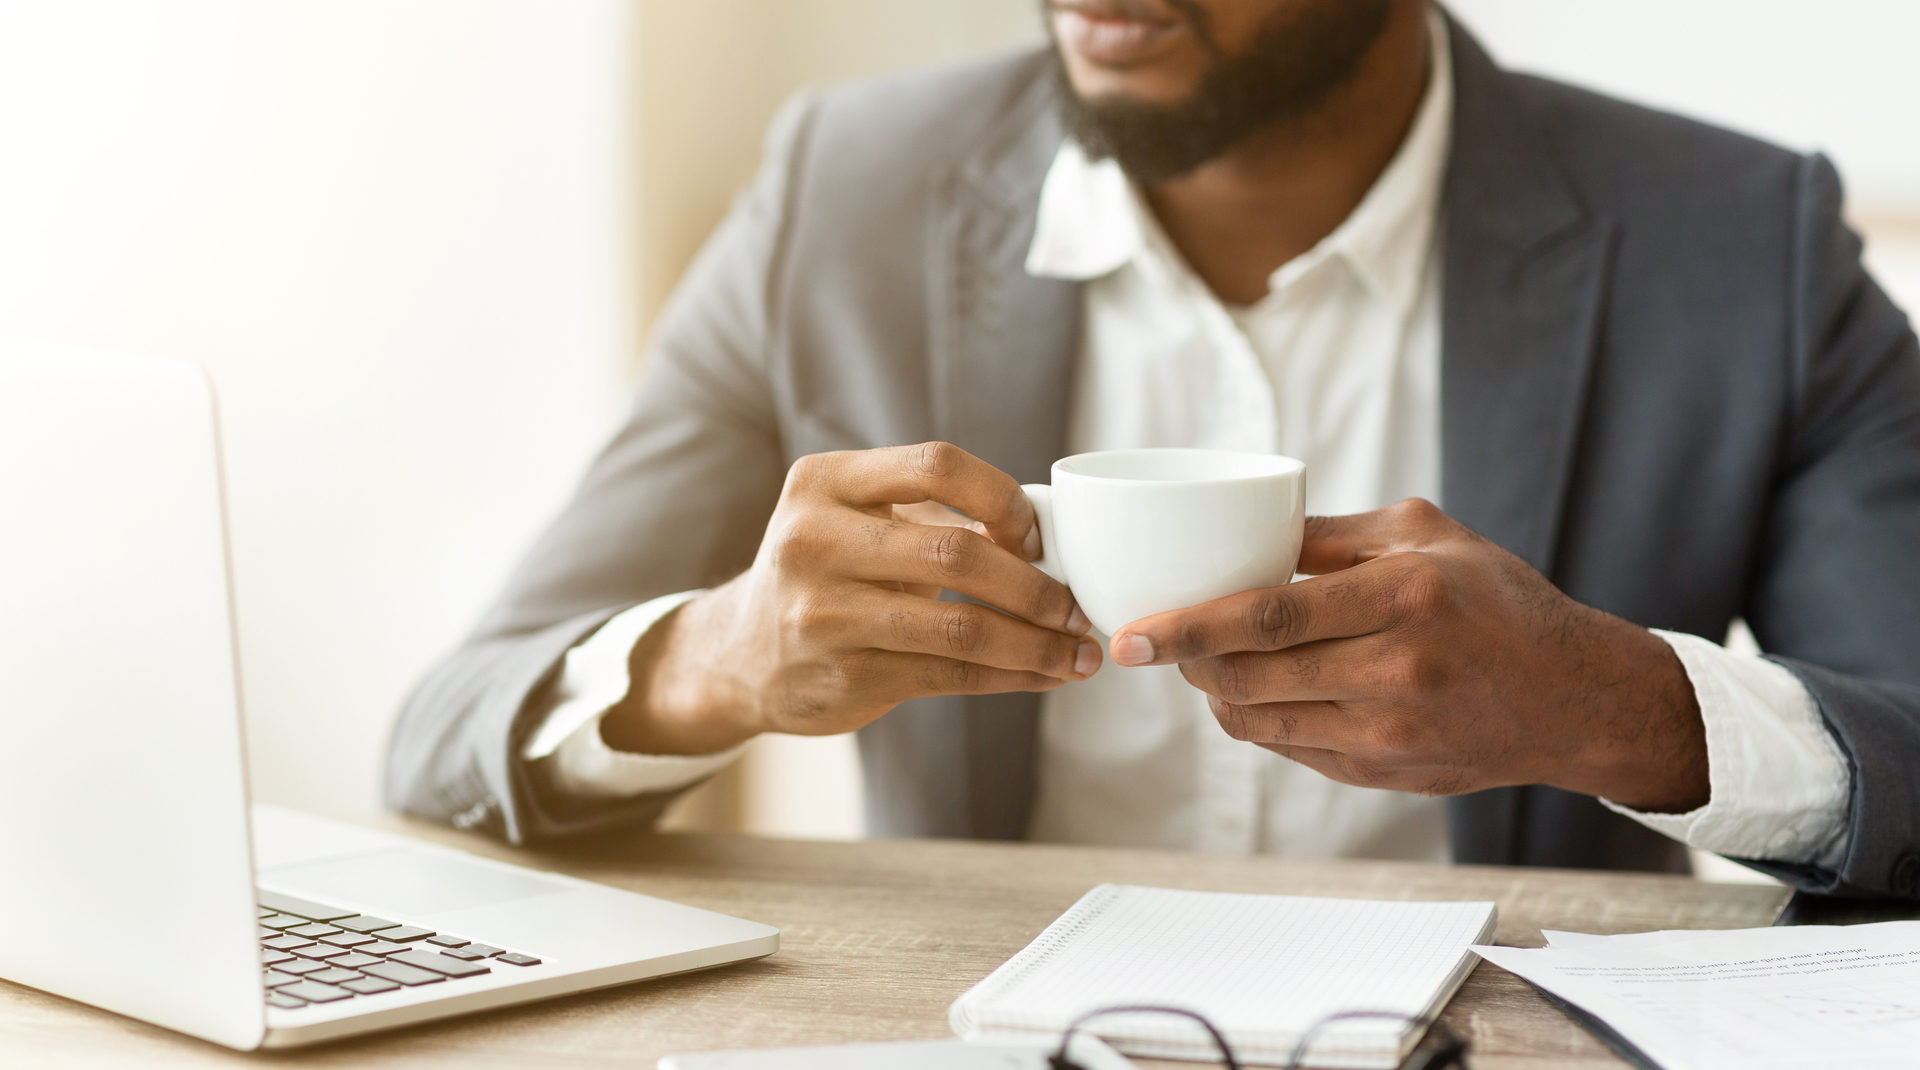 pensive businessman drinking coffee at workplace